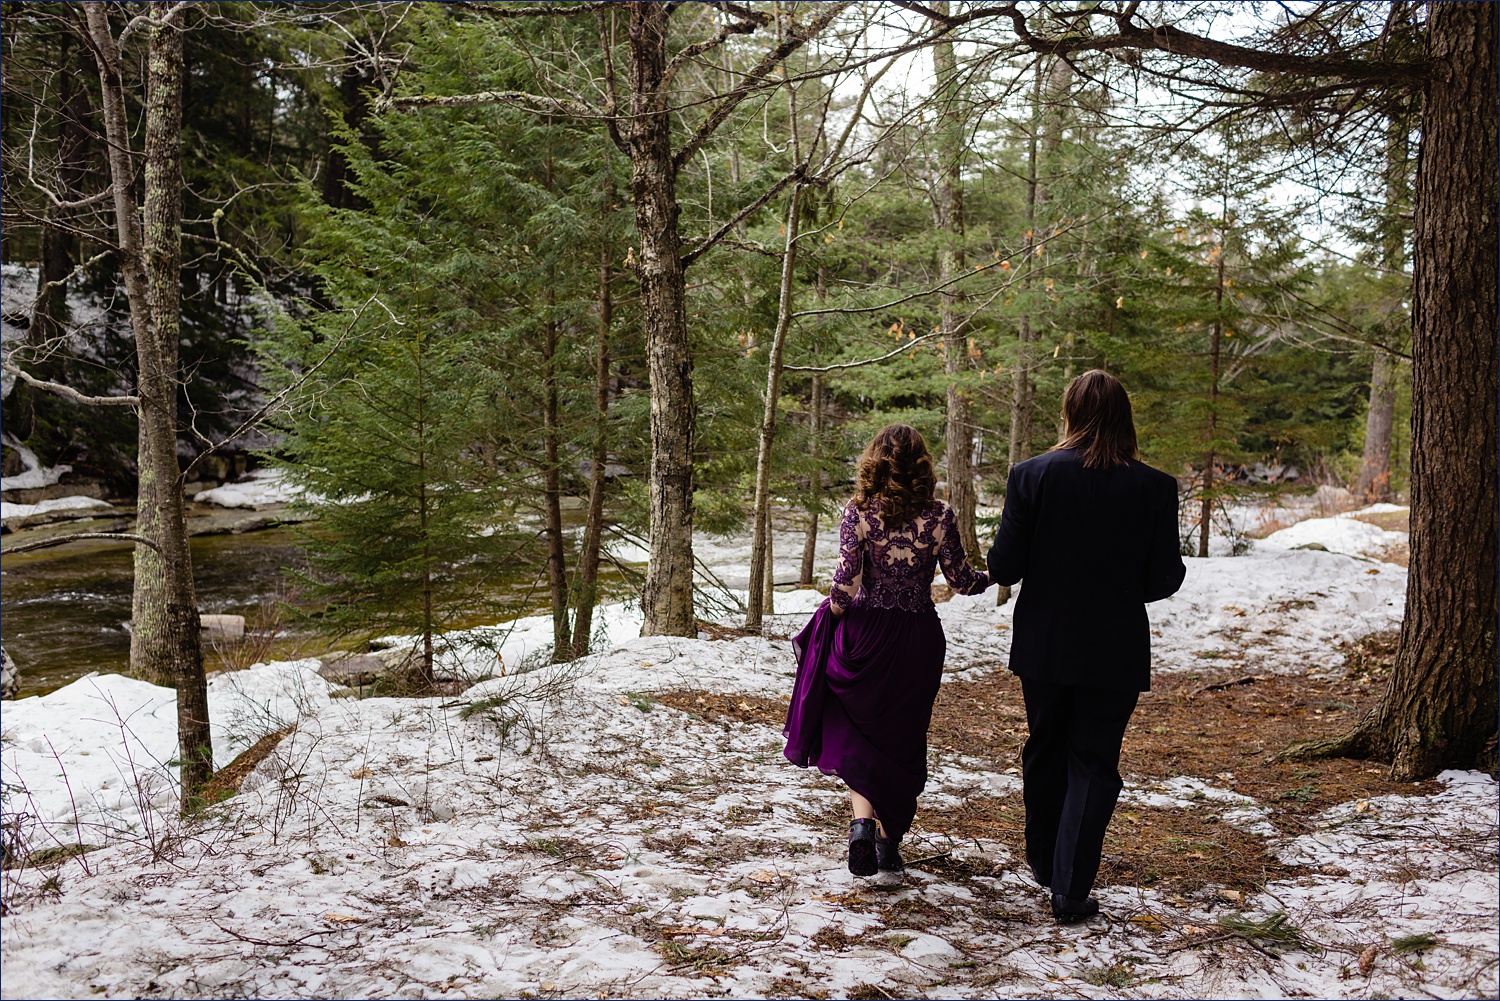 The bride wears her hiking boots with her purple wedding gown out in the spring time woods in Jackson, NH for their elopement adventure